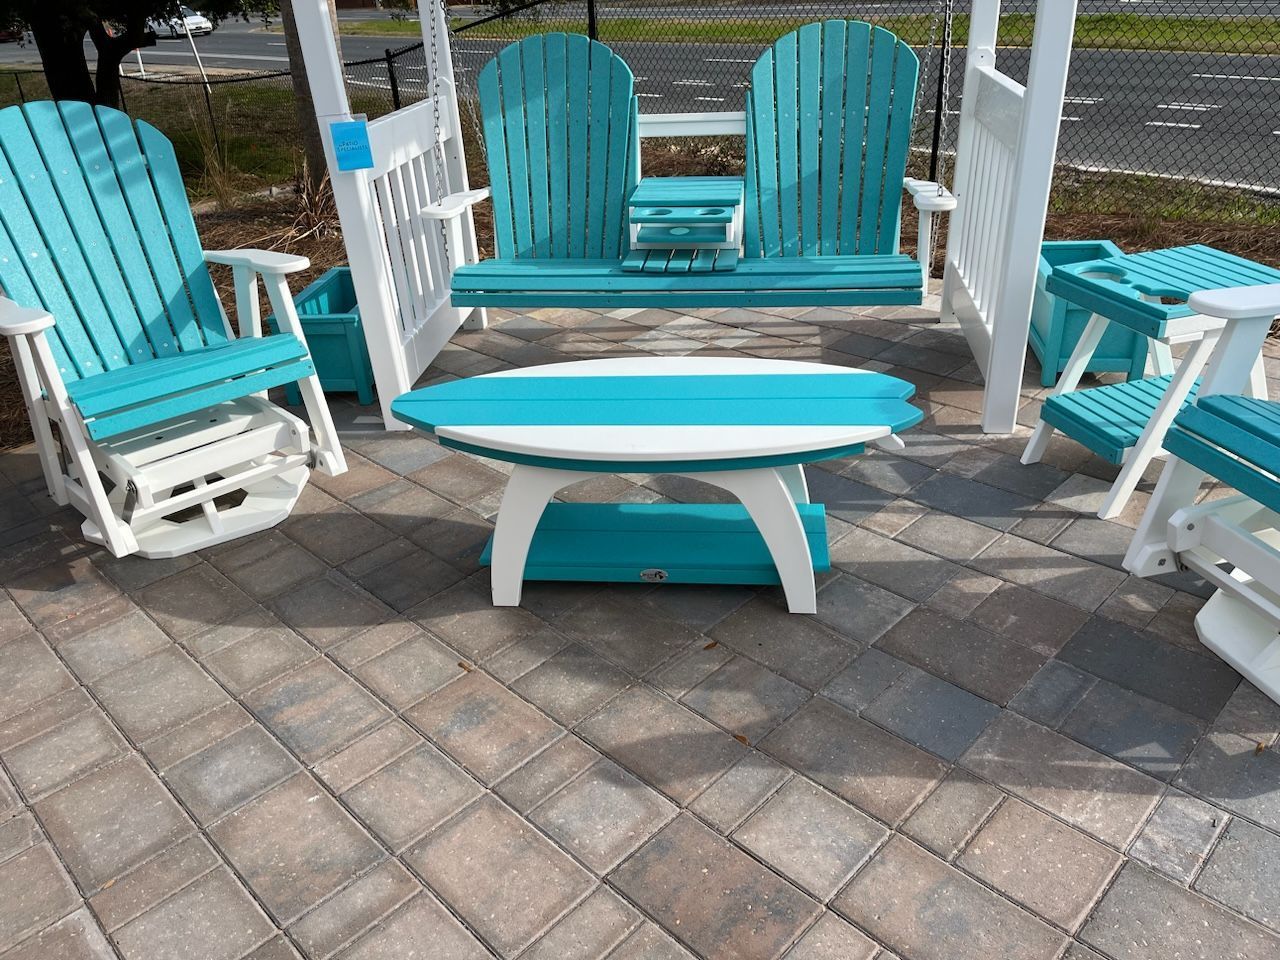 A blue and white patio set with a table, chairs, and a swing.